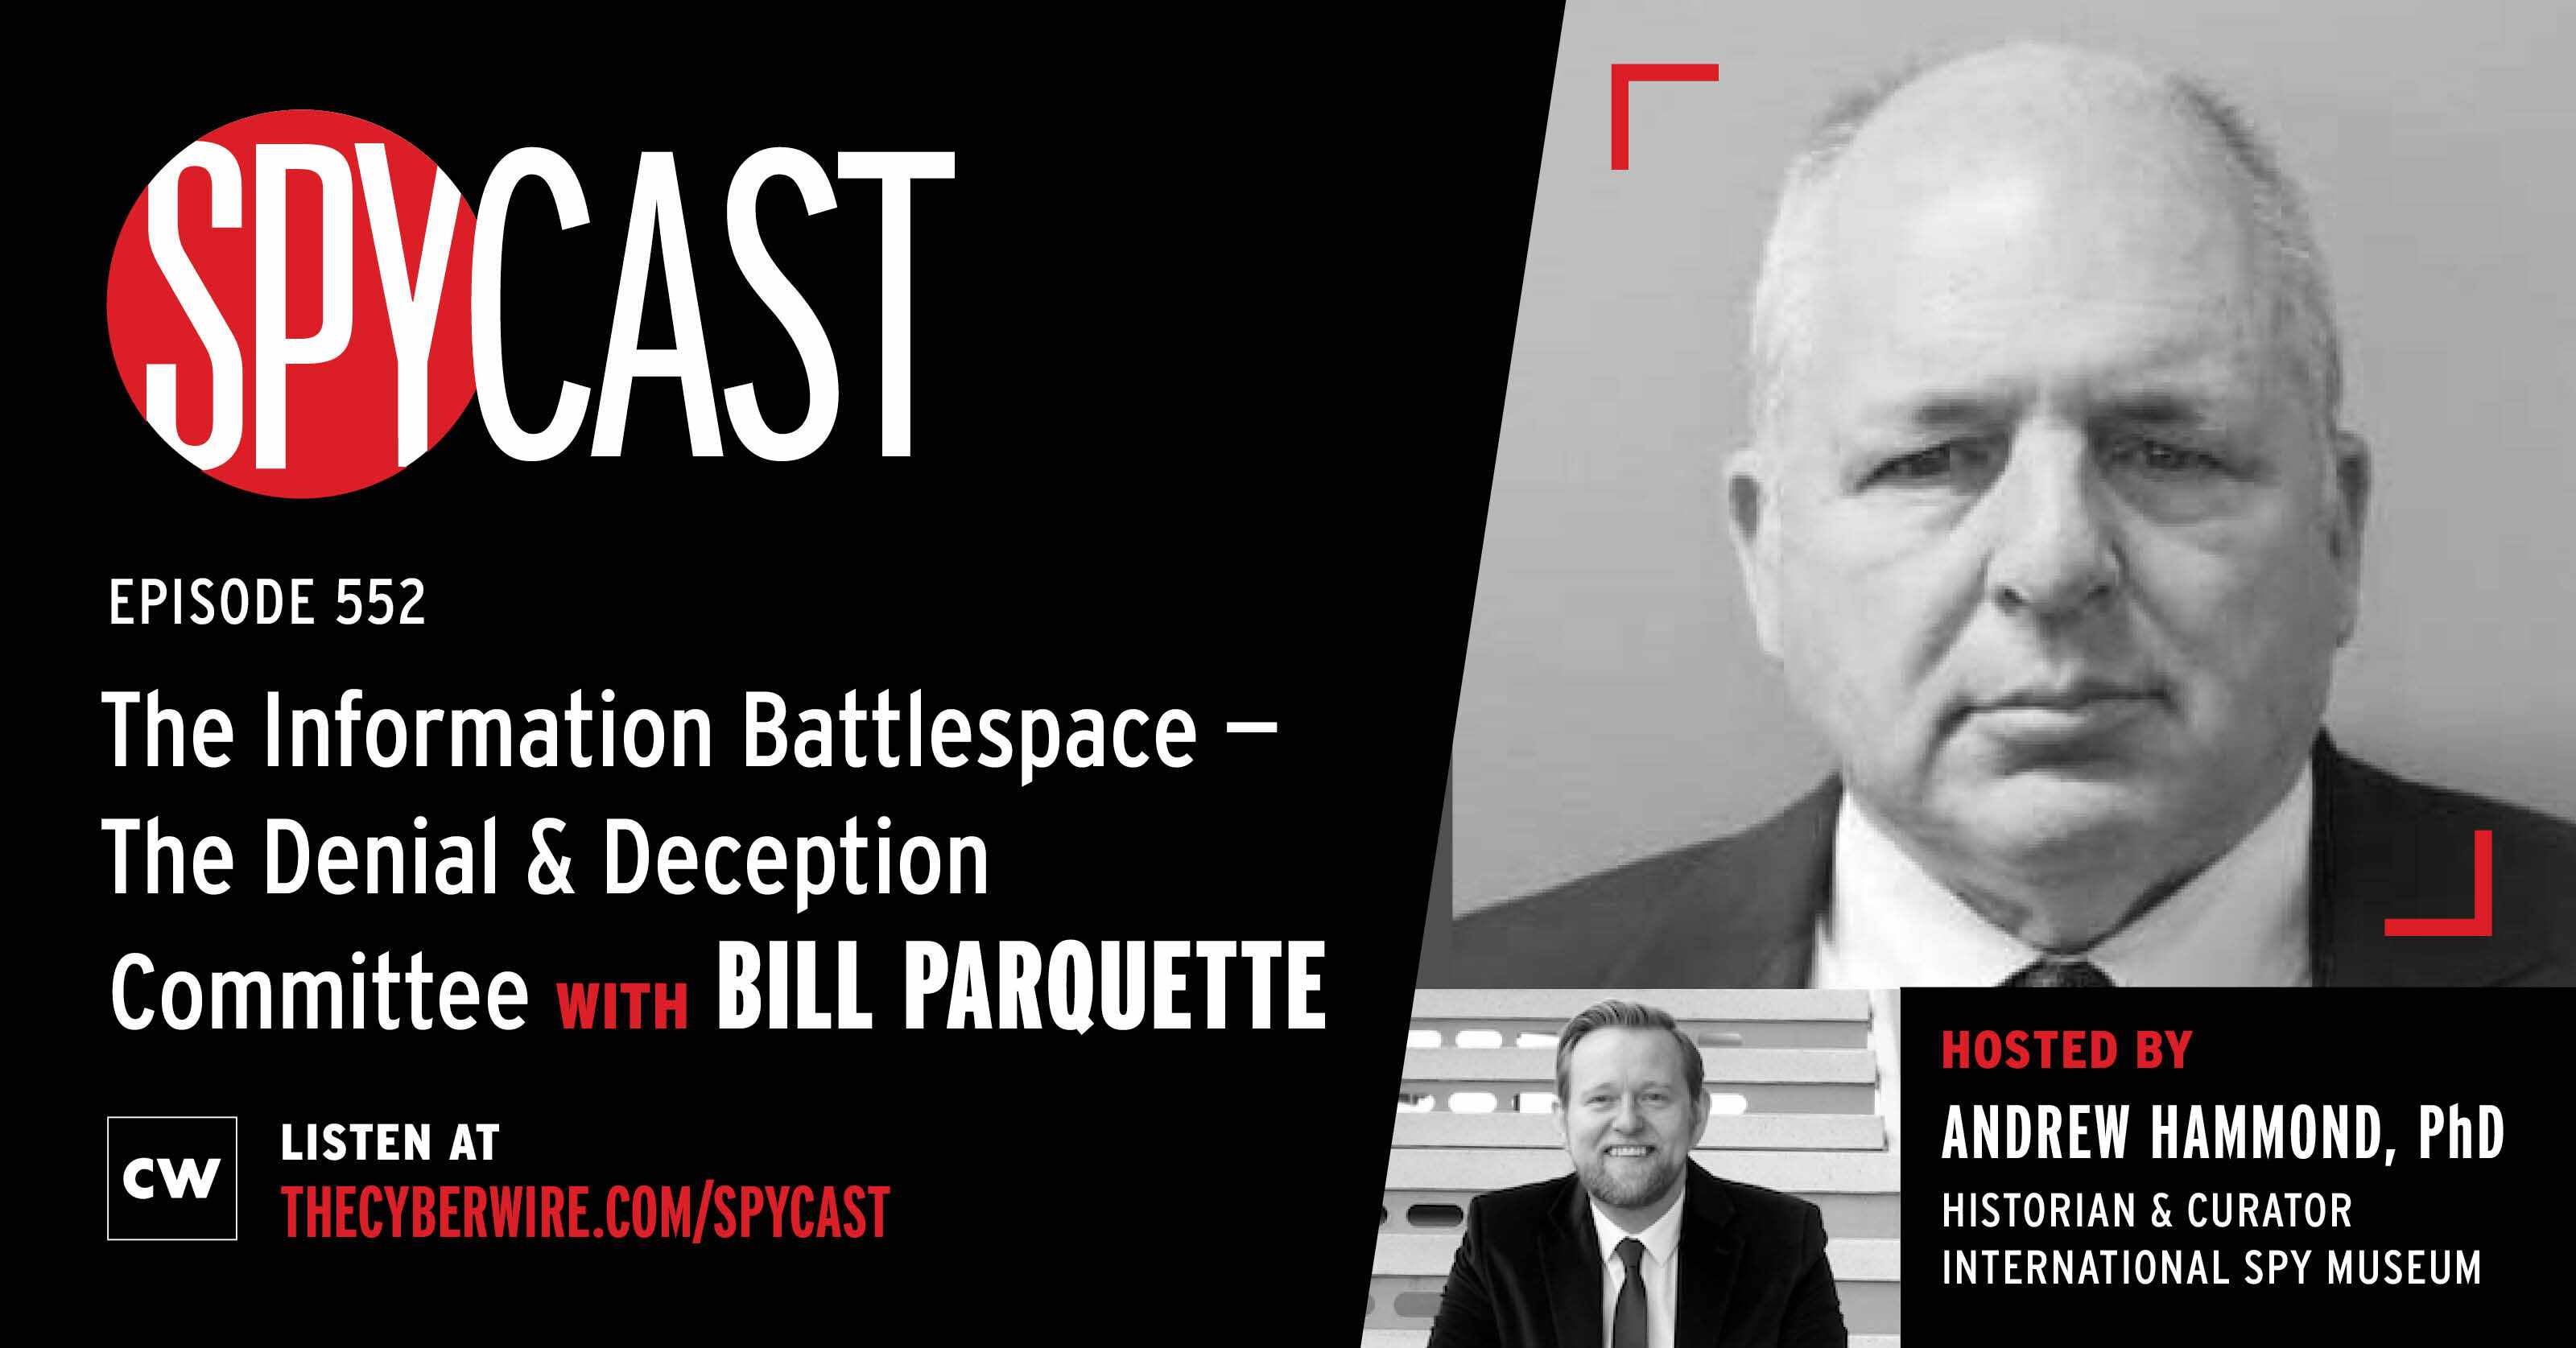 “The Information Battlespace” – Foreign Denial and Deception with Bill Parquette